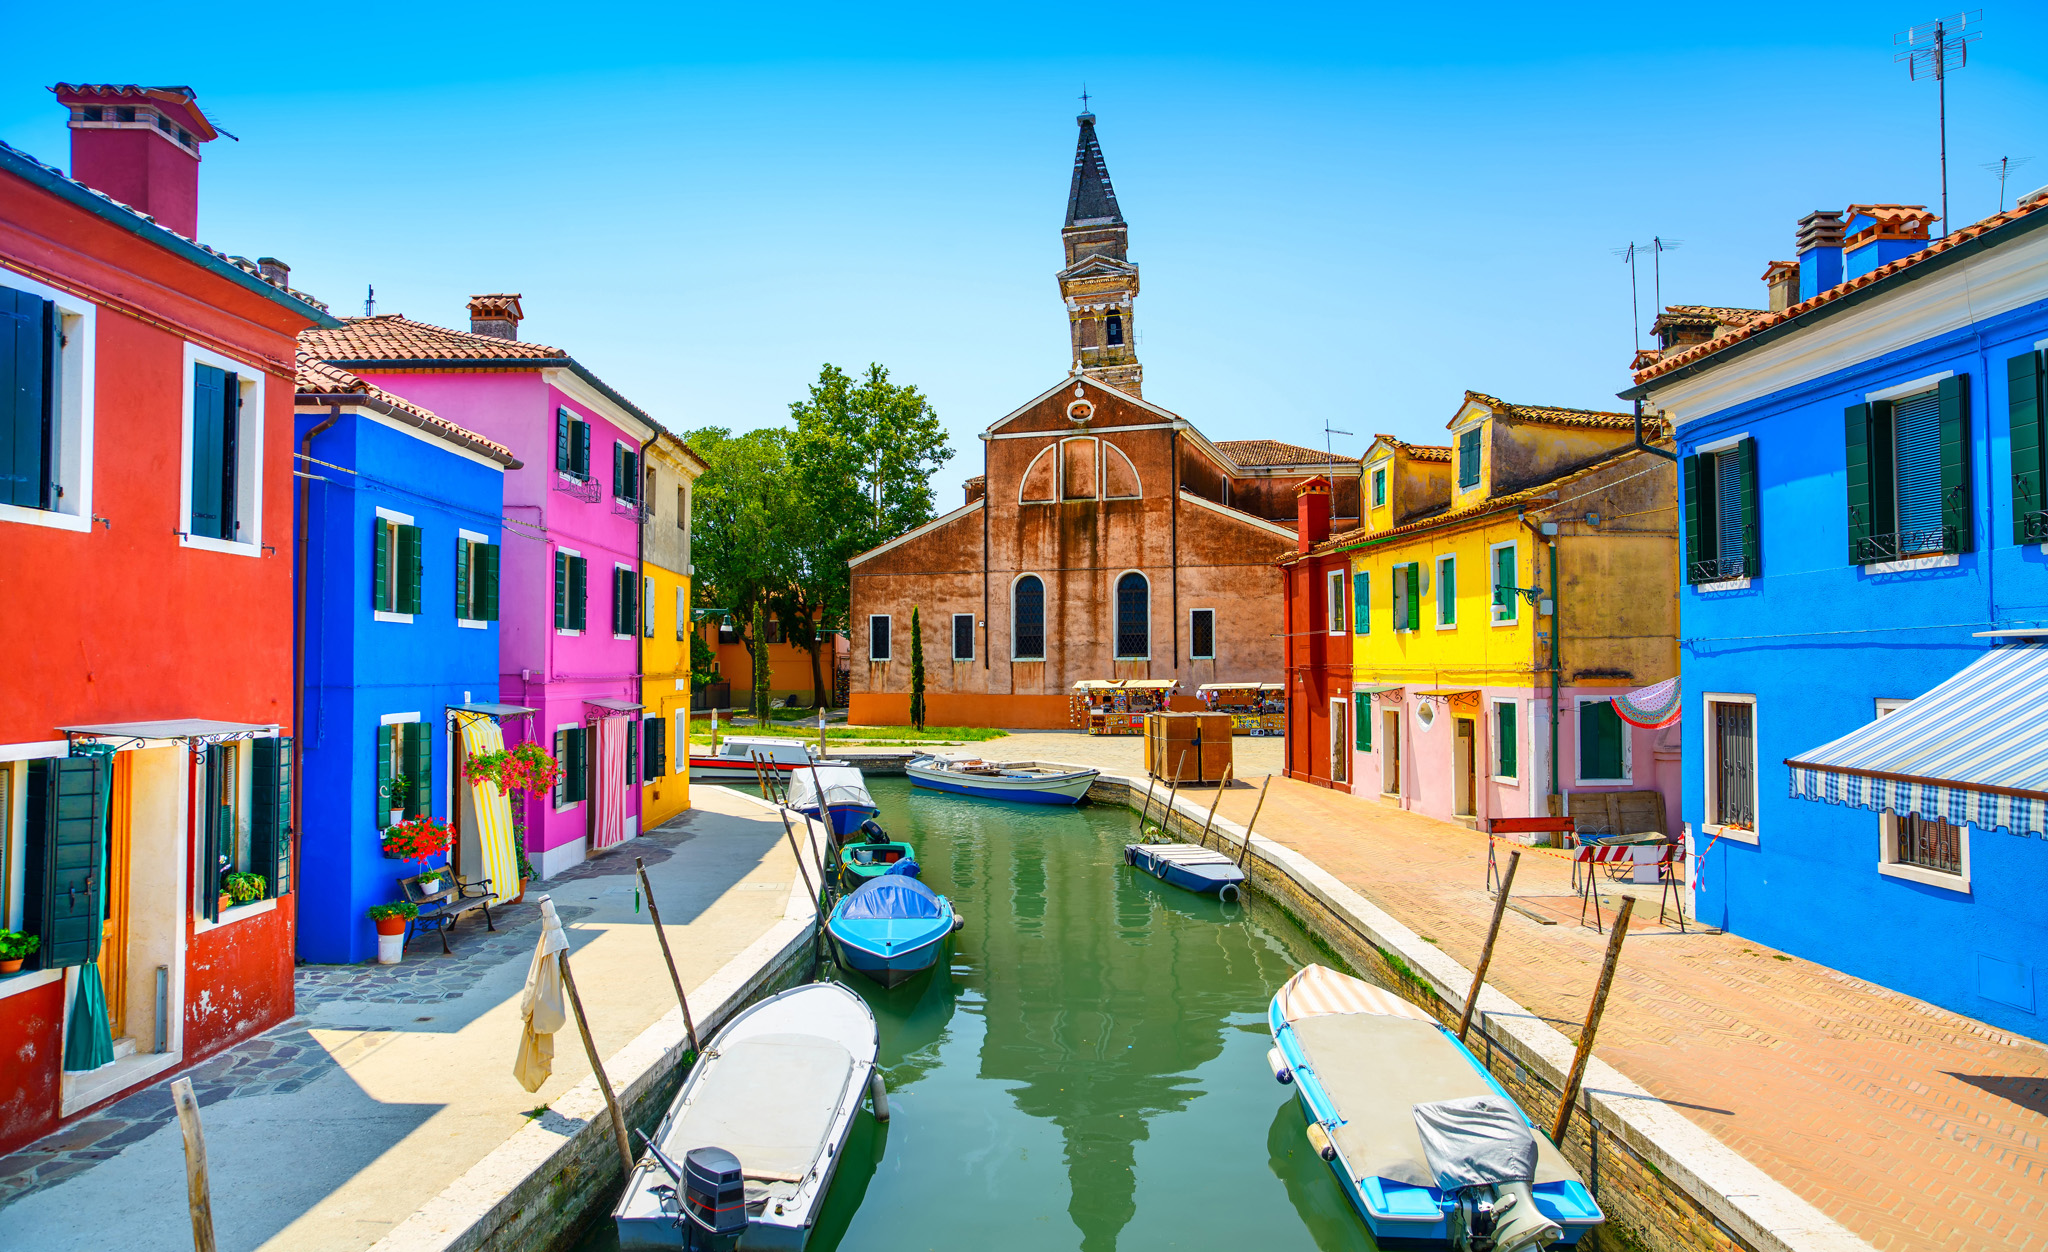 The island of Burano is well worth a visit for its splendid array of colourful - photo 6